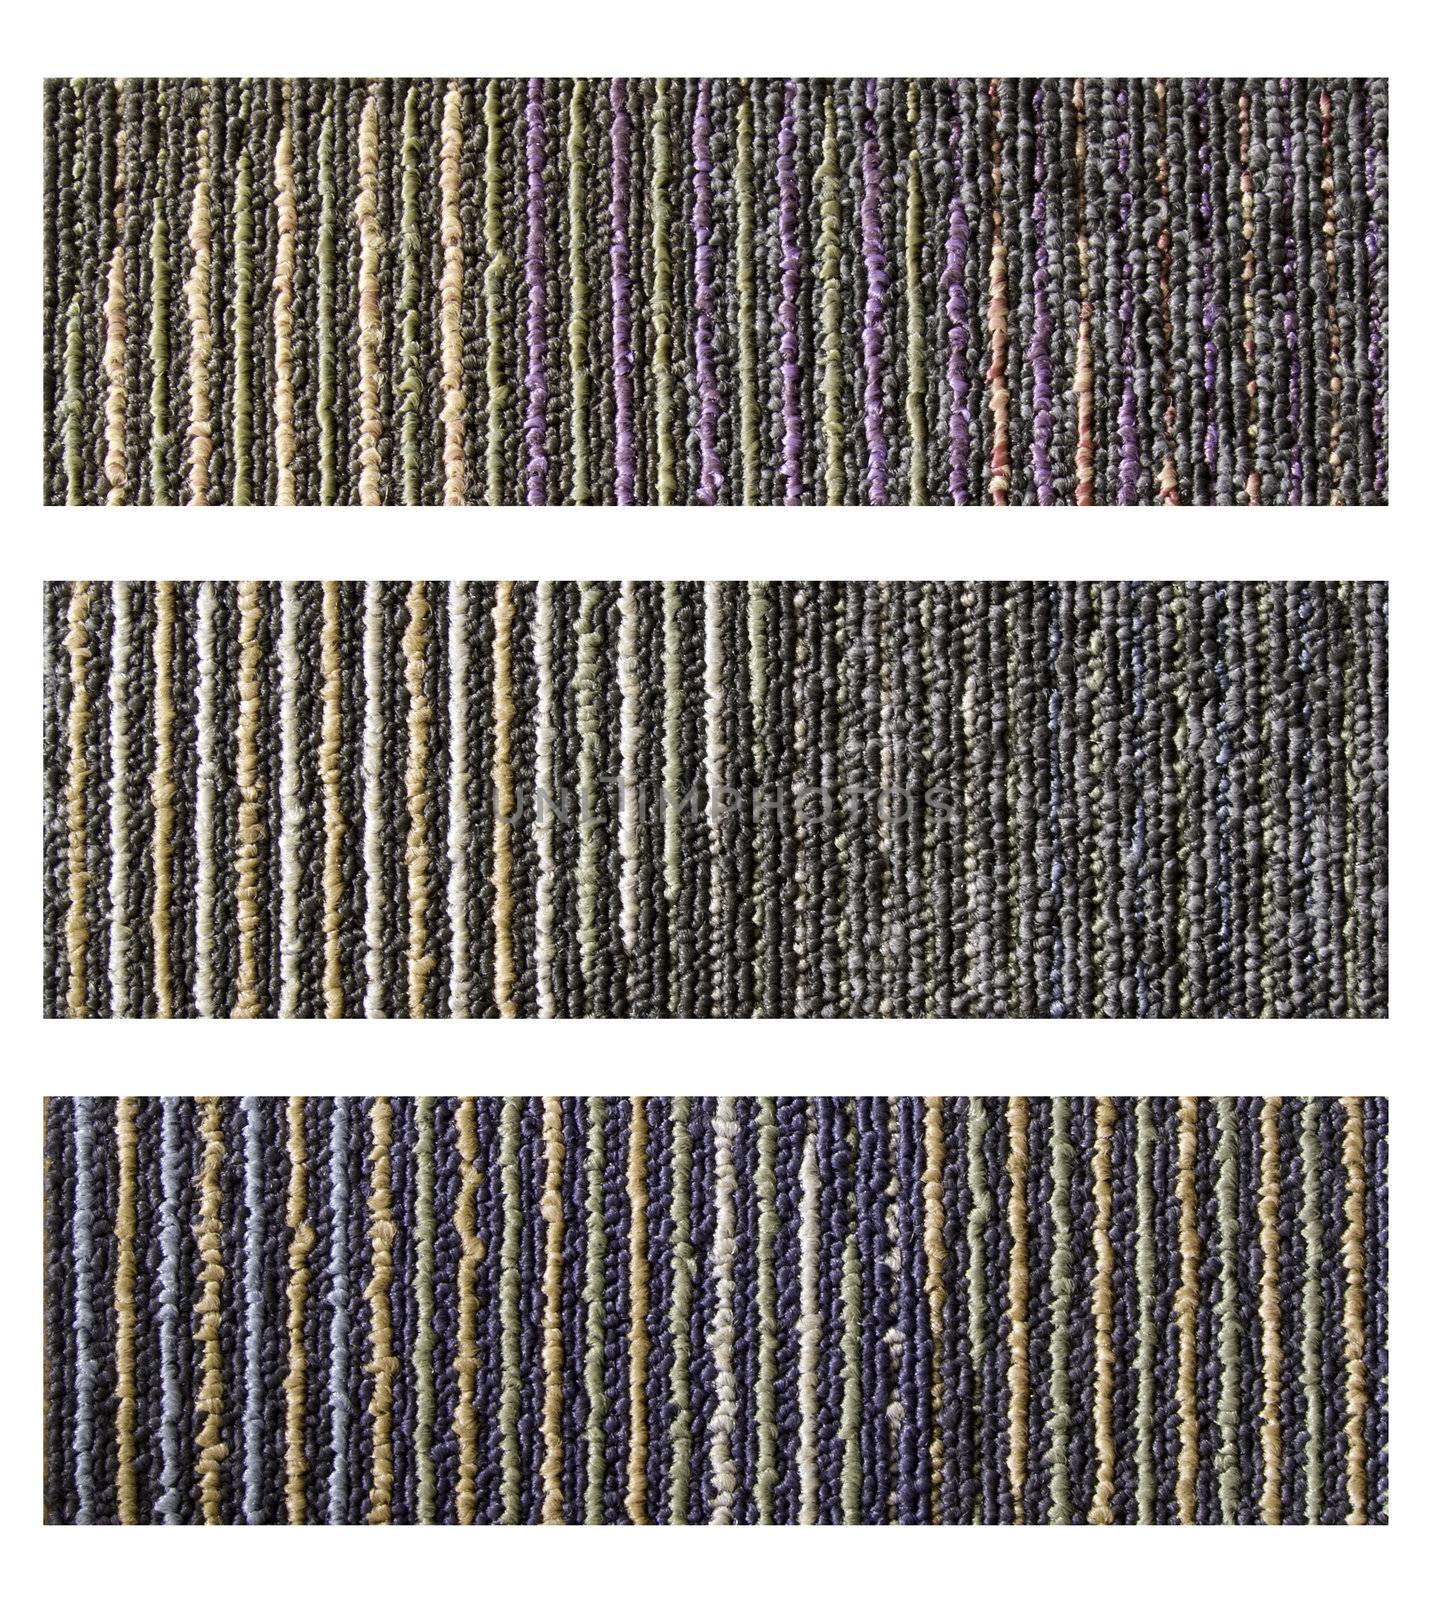 Samples of collection carpet on a white  by siraanamwong